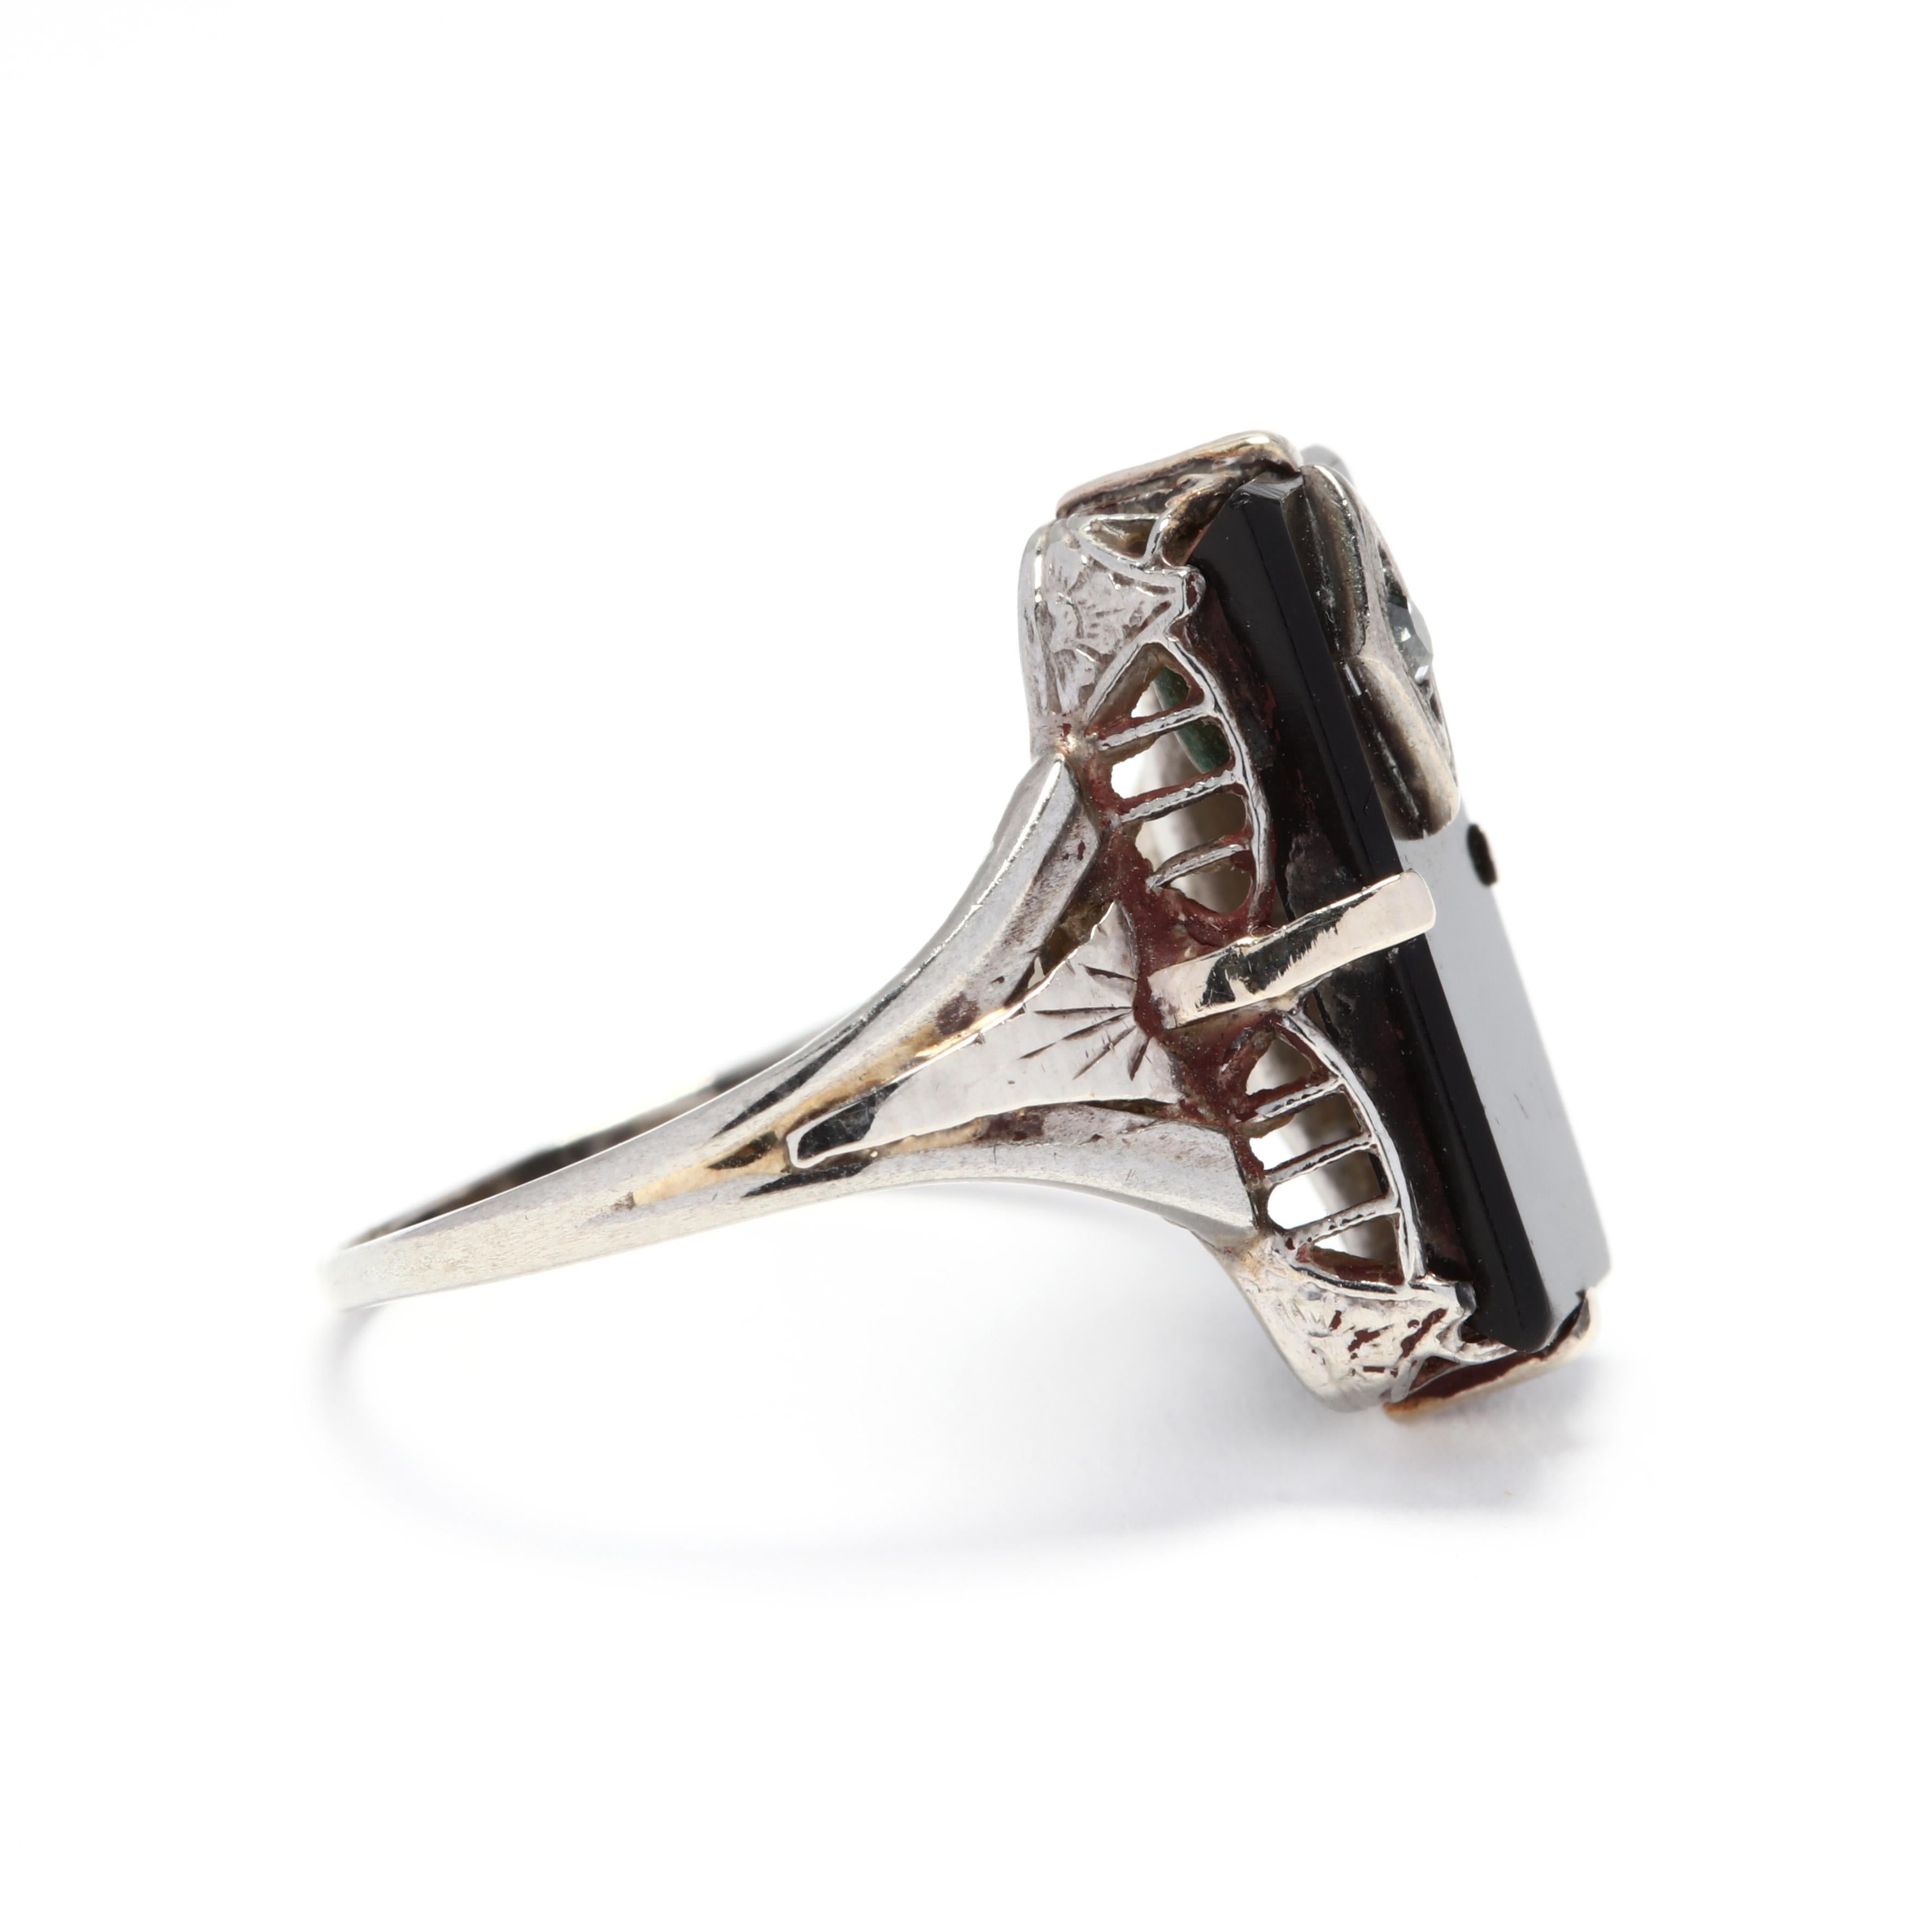 A 1940's 10 karat white gold diamond and black onyx rectangle ring. This ring features a black onyx table stone with a single cut diamond set in a white gold marquise station in the black onyx table and with floral and filigree detailing.

Stones:
-